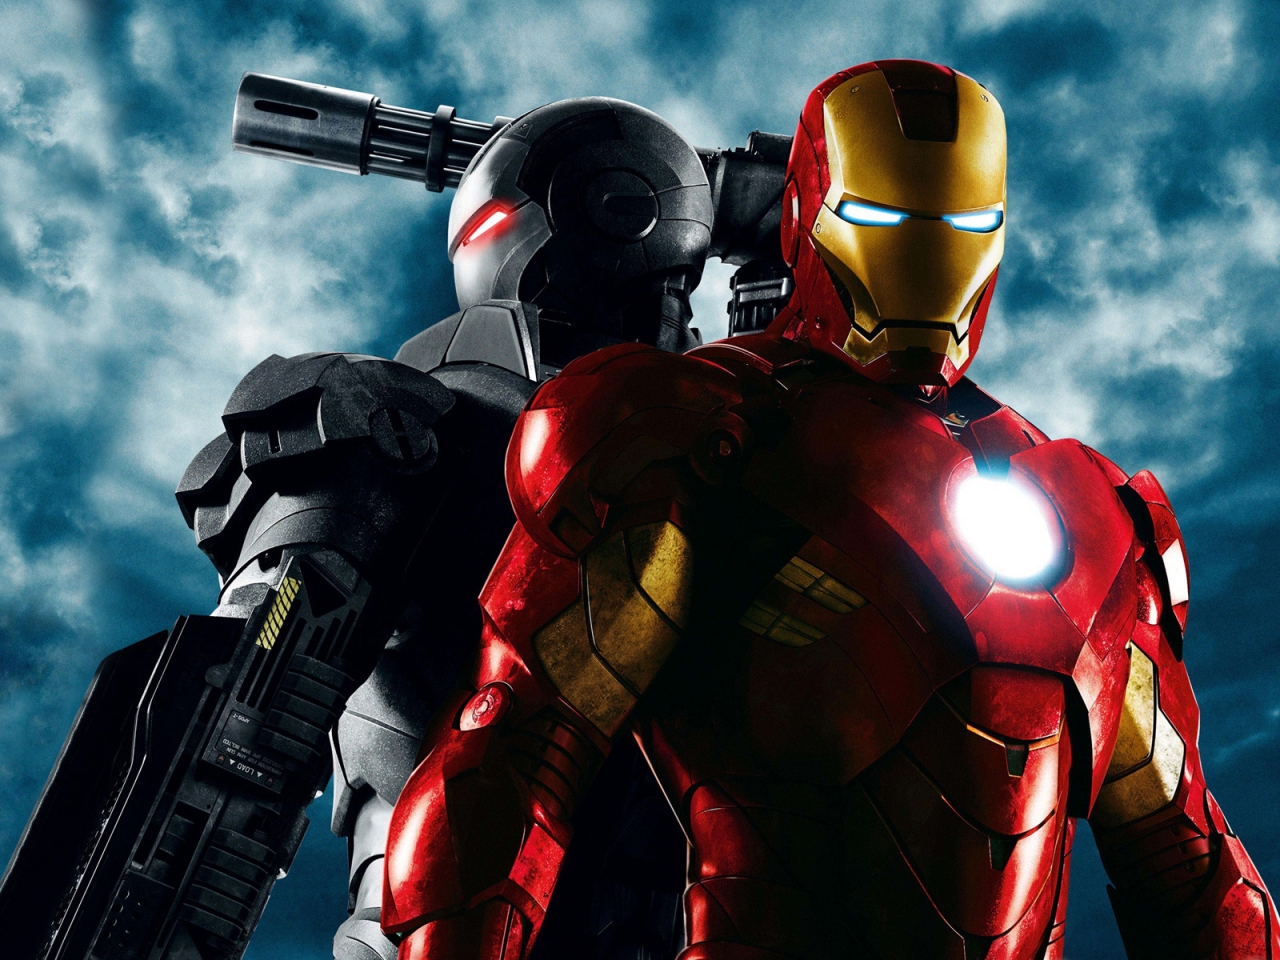 Iron Man 2 Poster for 1280 x 960 resolution